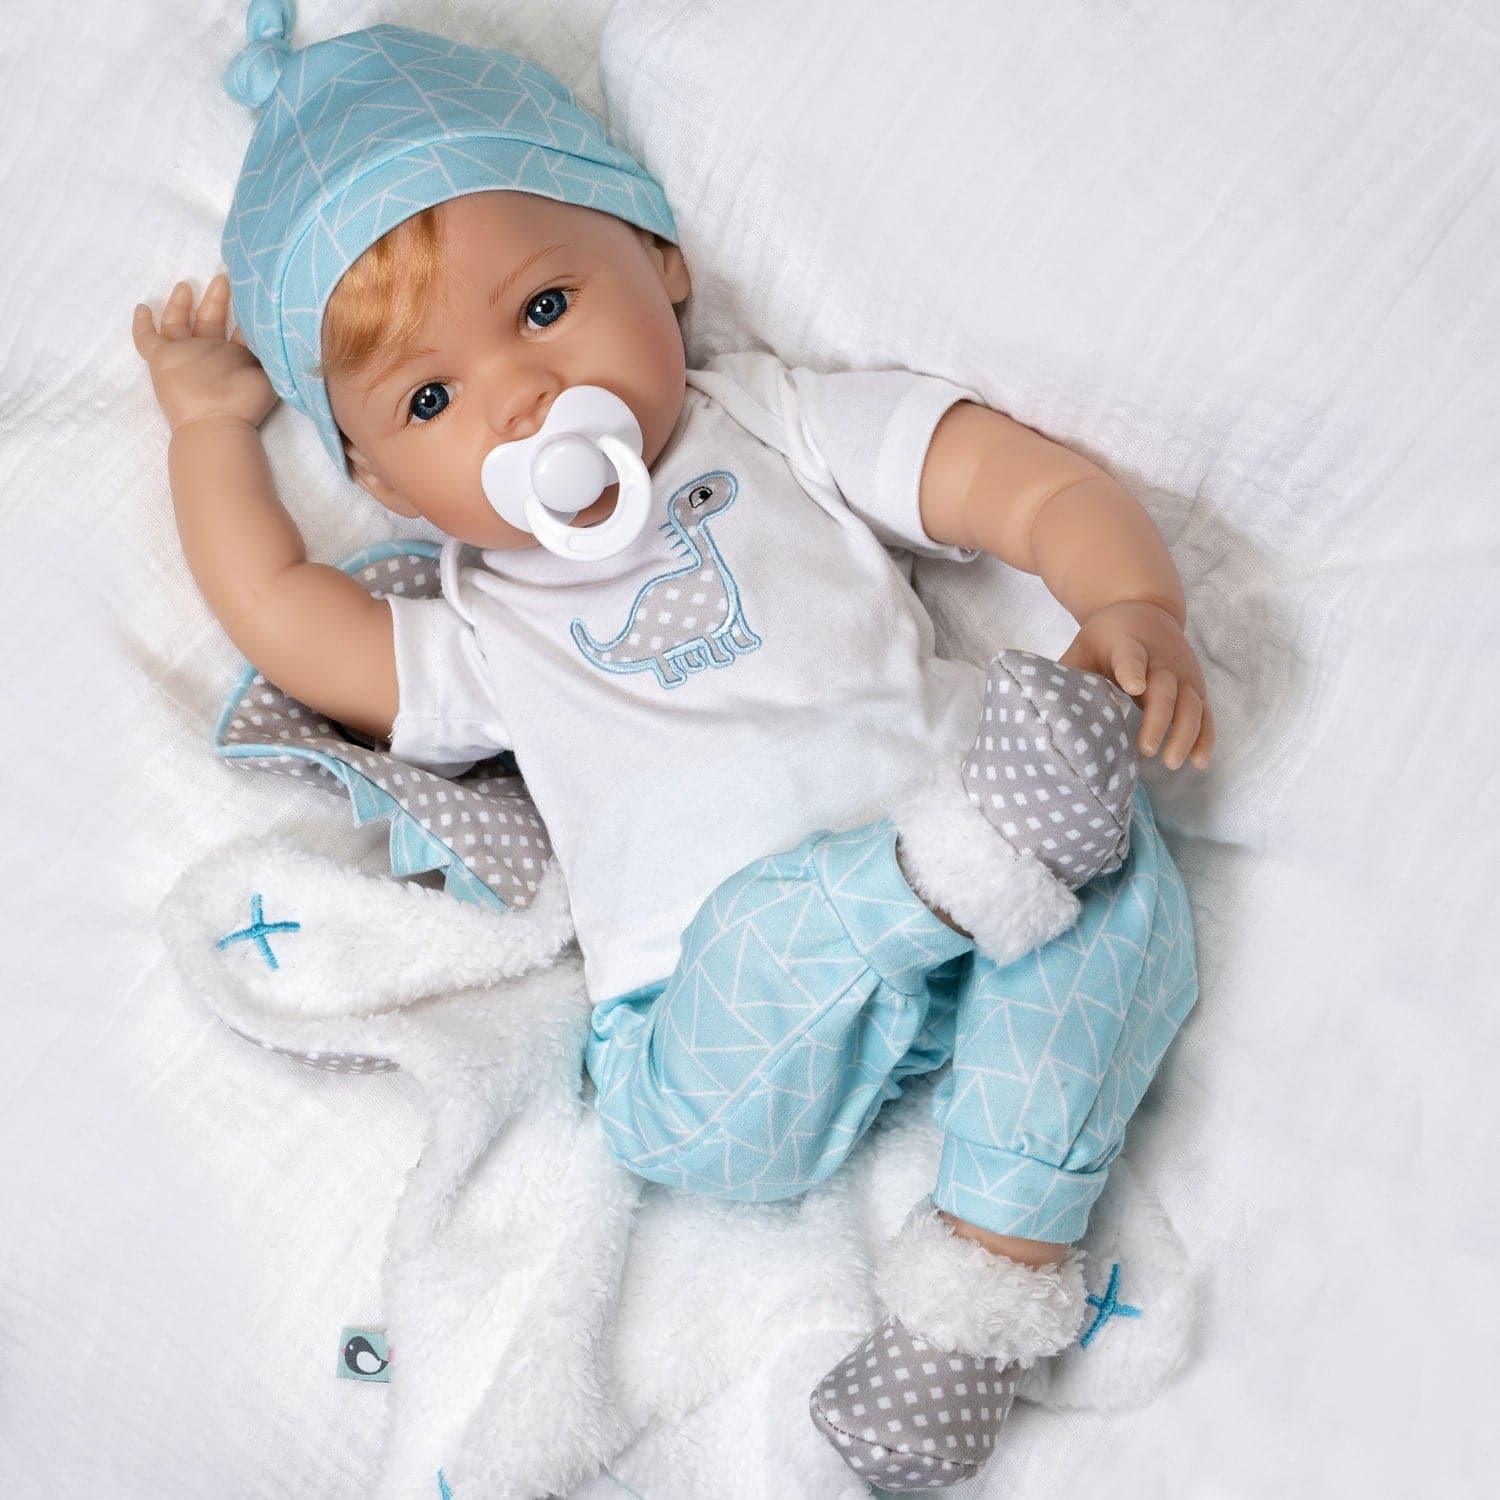 Paradise Galleries Realistic Boy Doll Dino Darling 20